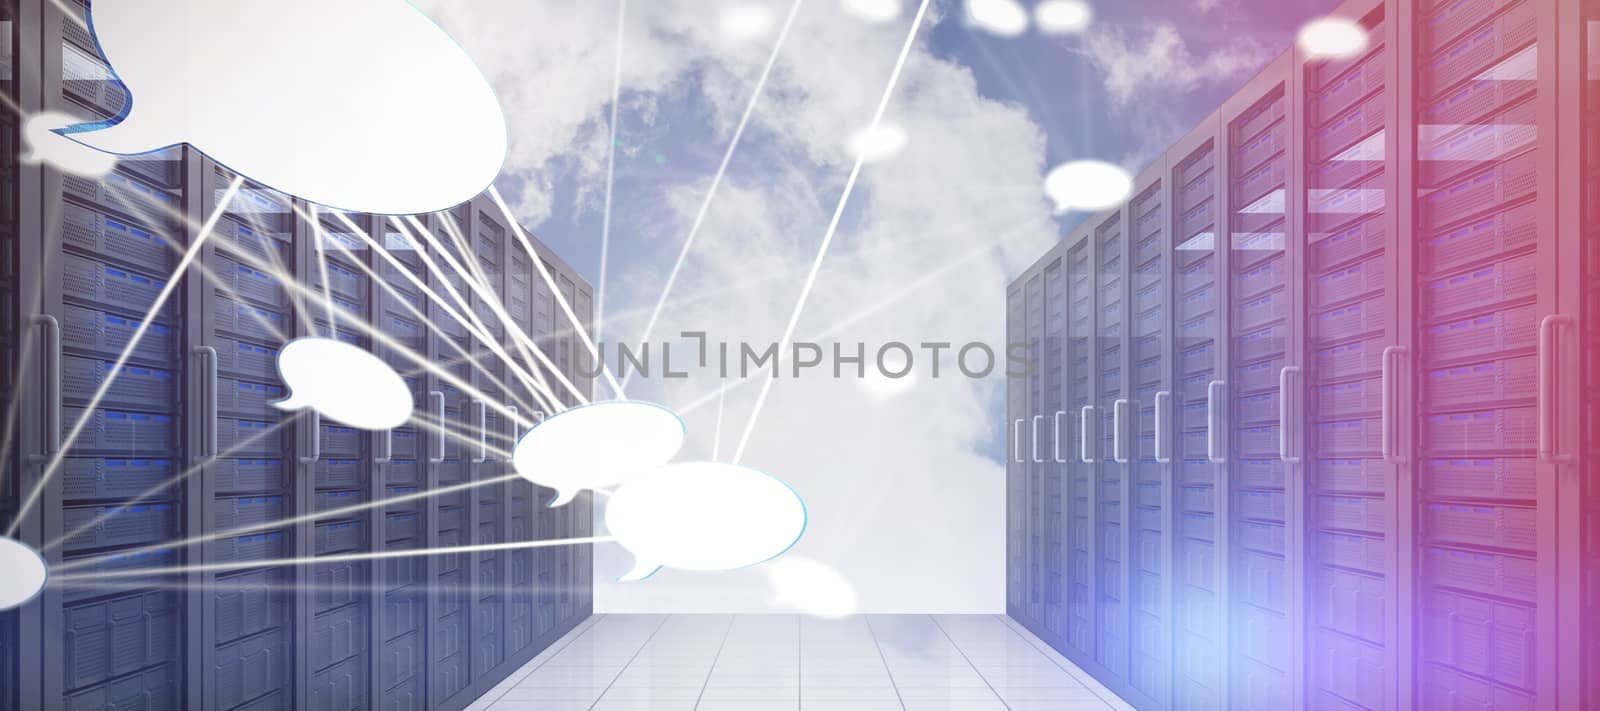 Abstract image of speech bubble against server racks against sky and cloud